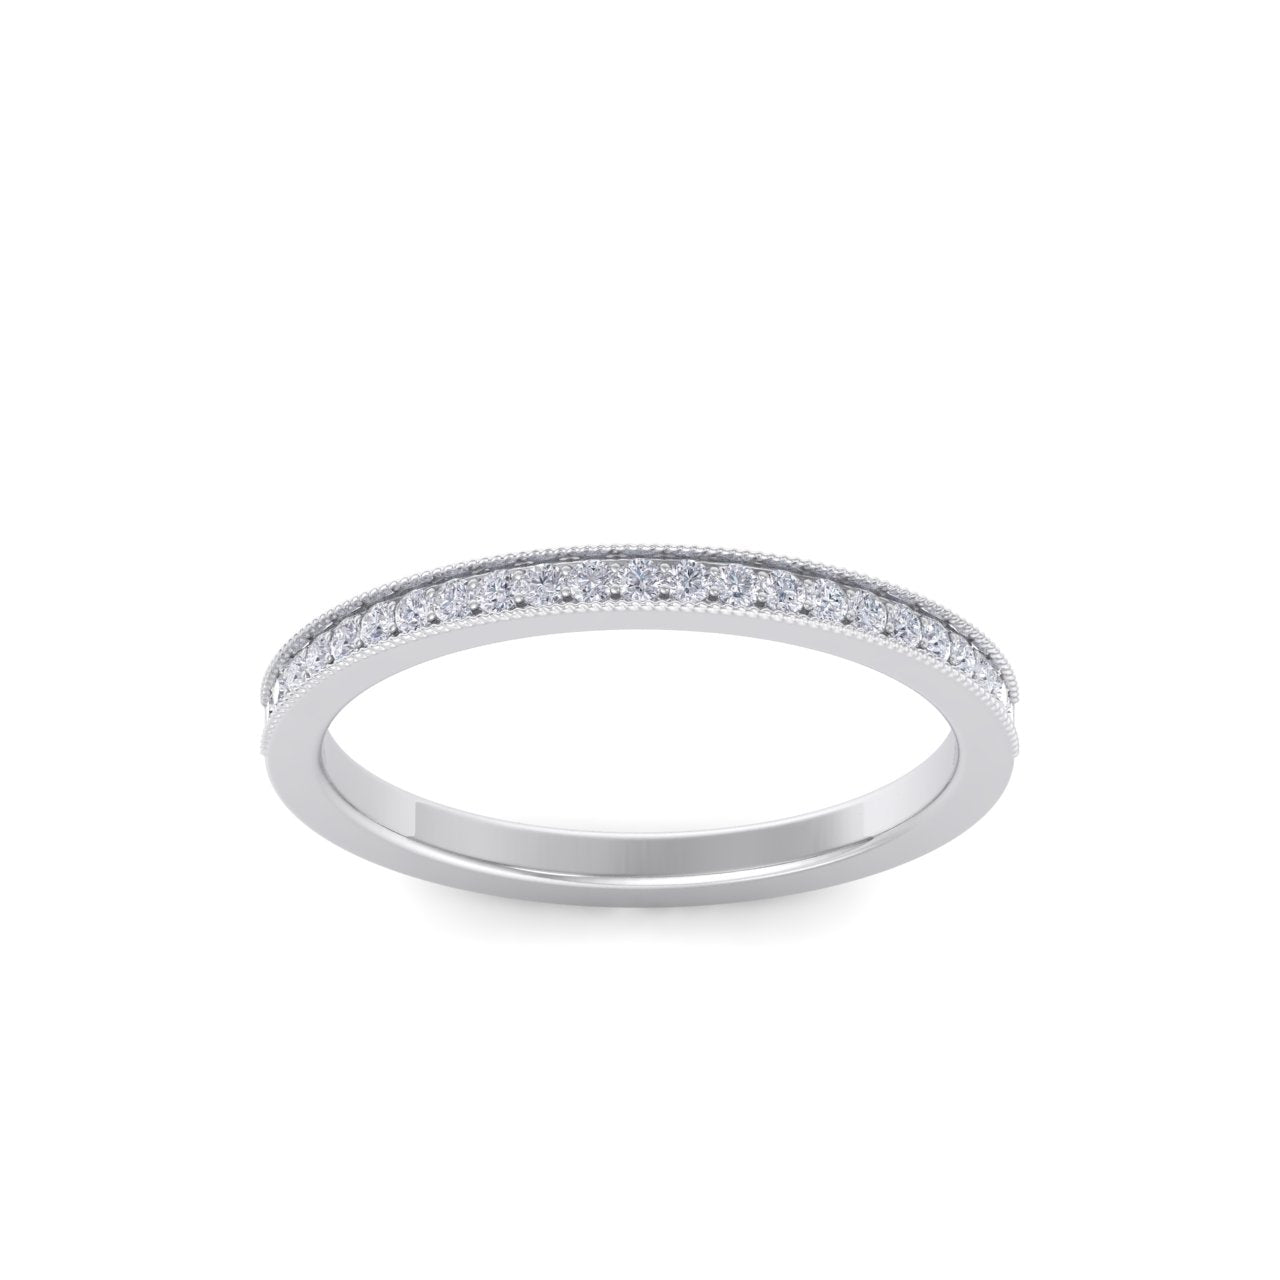 Diamond ring in white gold with white diamonds of 0.15 ct in weight